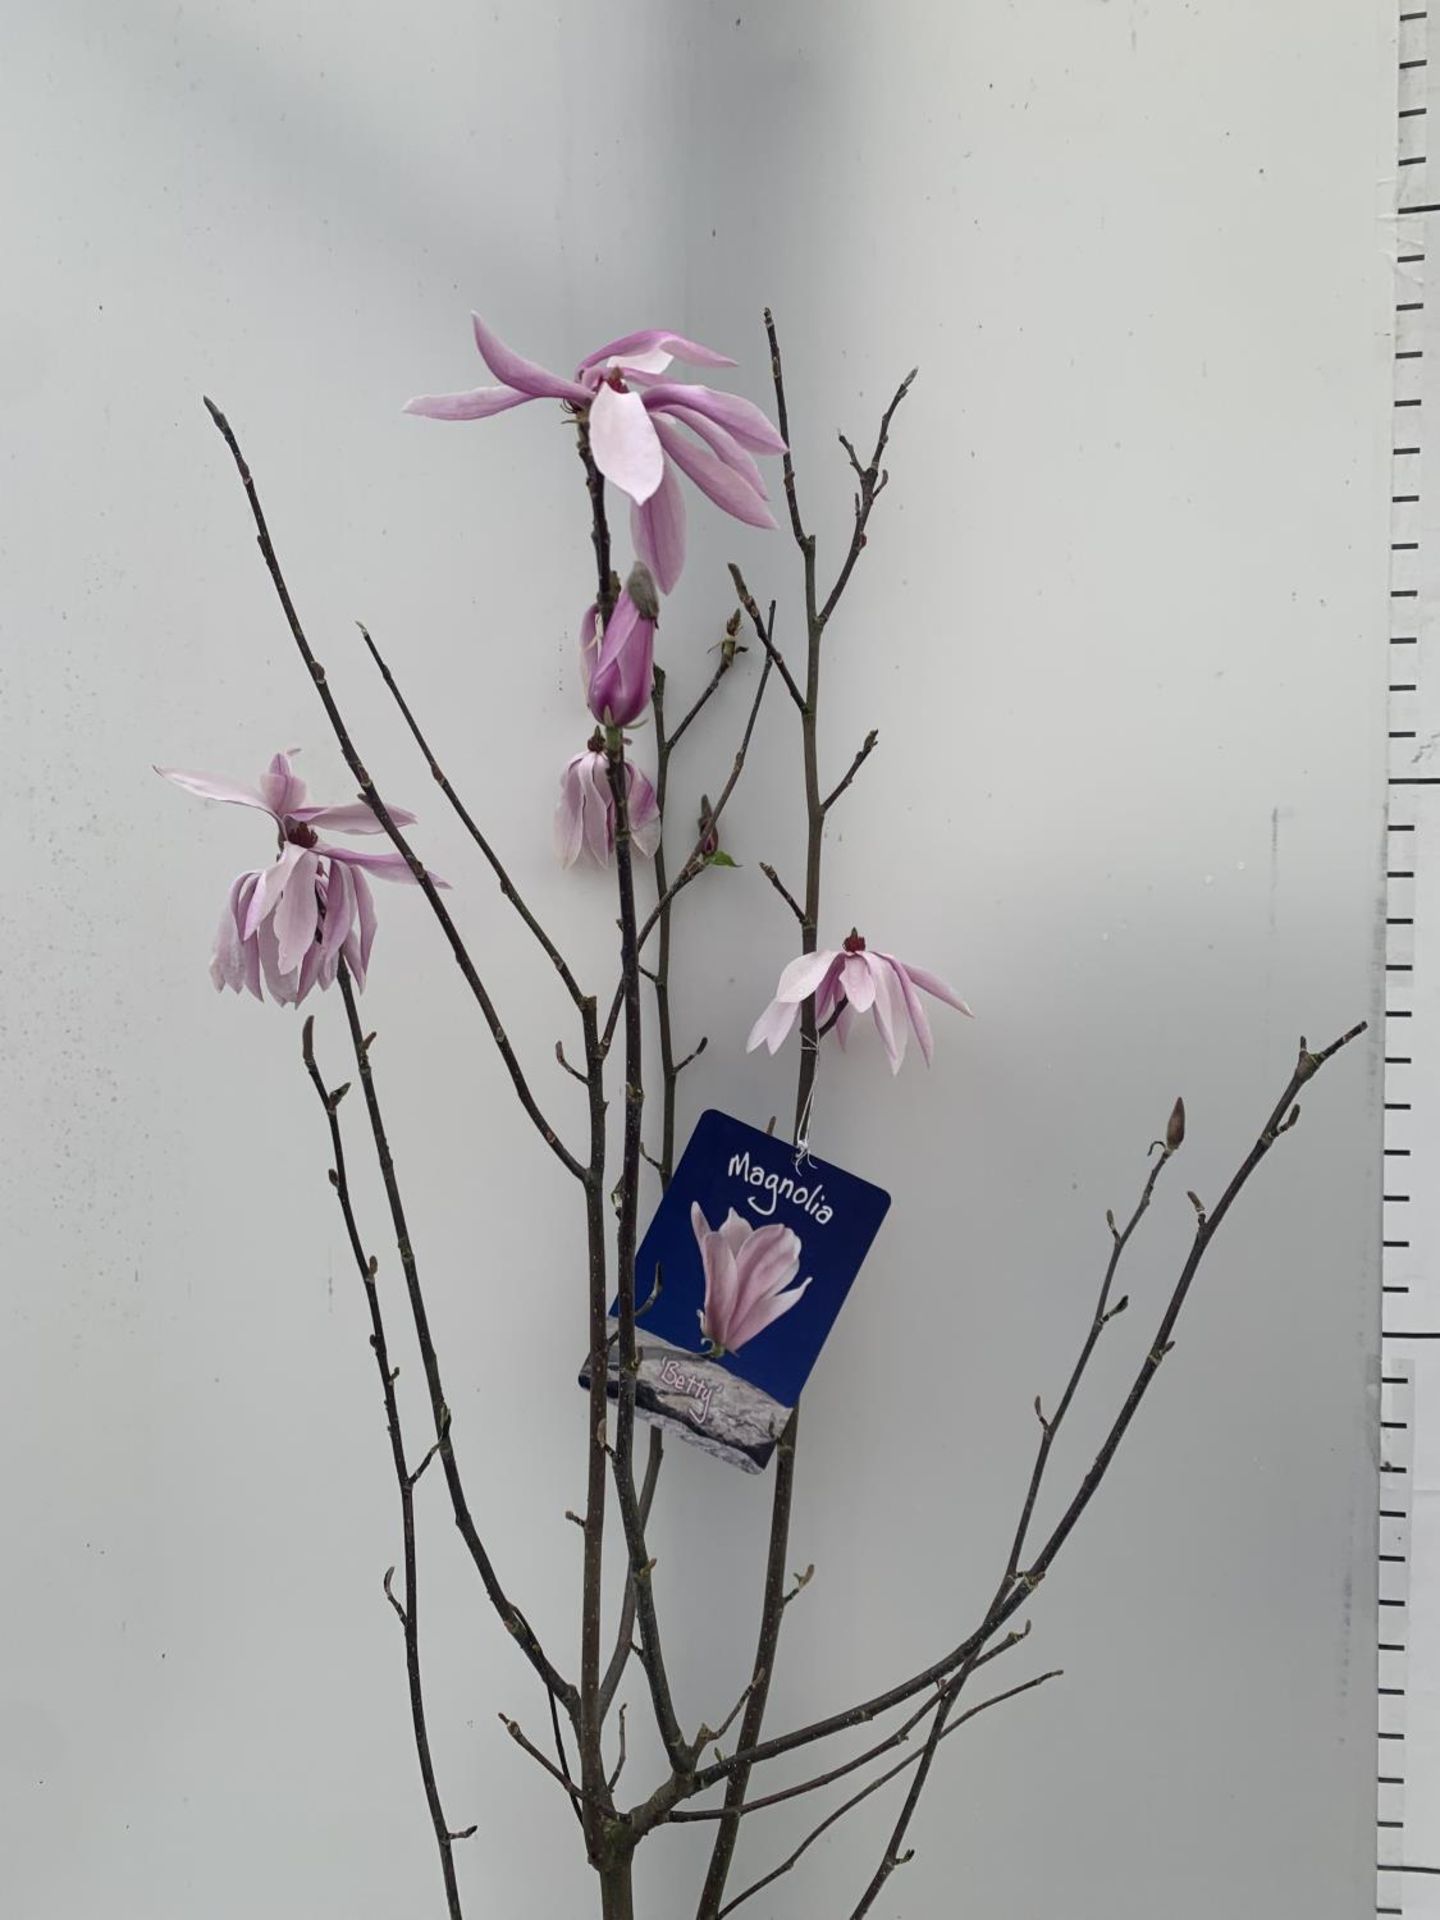 ONE MAGNOLIA 'BETTY' PINK IN A 7 LTR POT APPROX 120CM IN HEIGHT PLUS VAT - Image 3 of 6